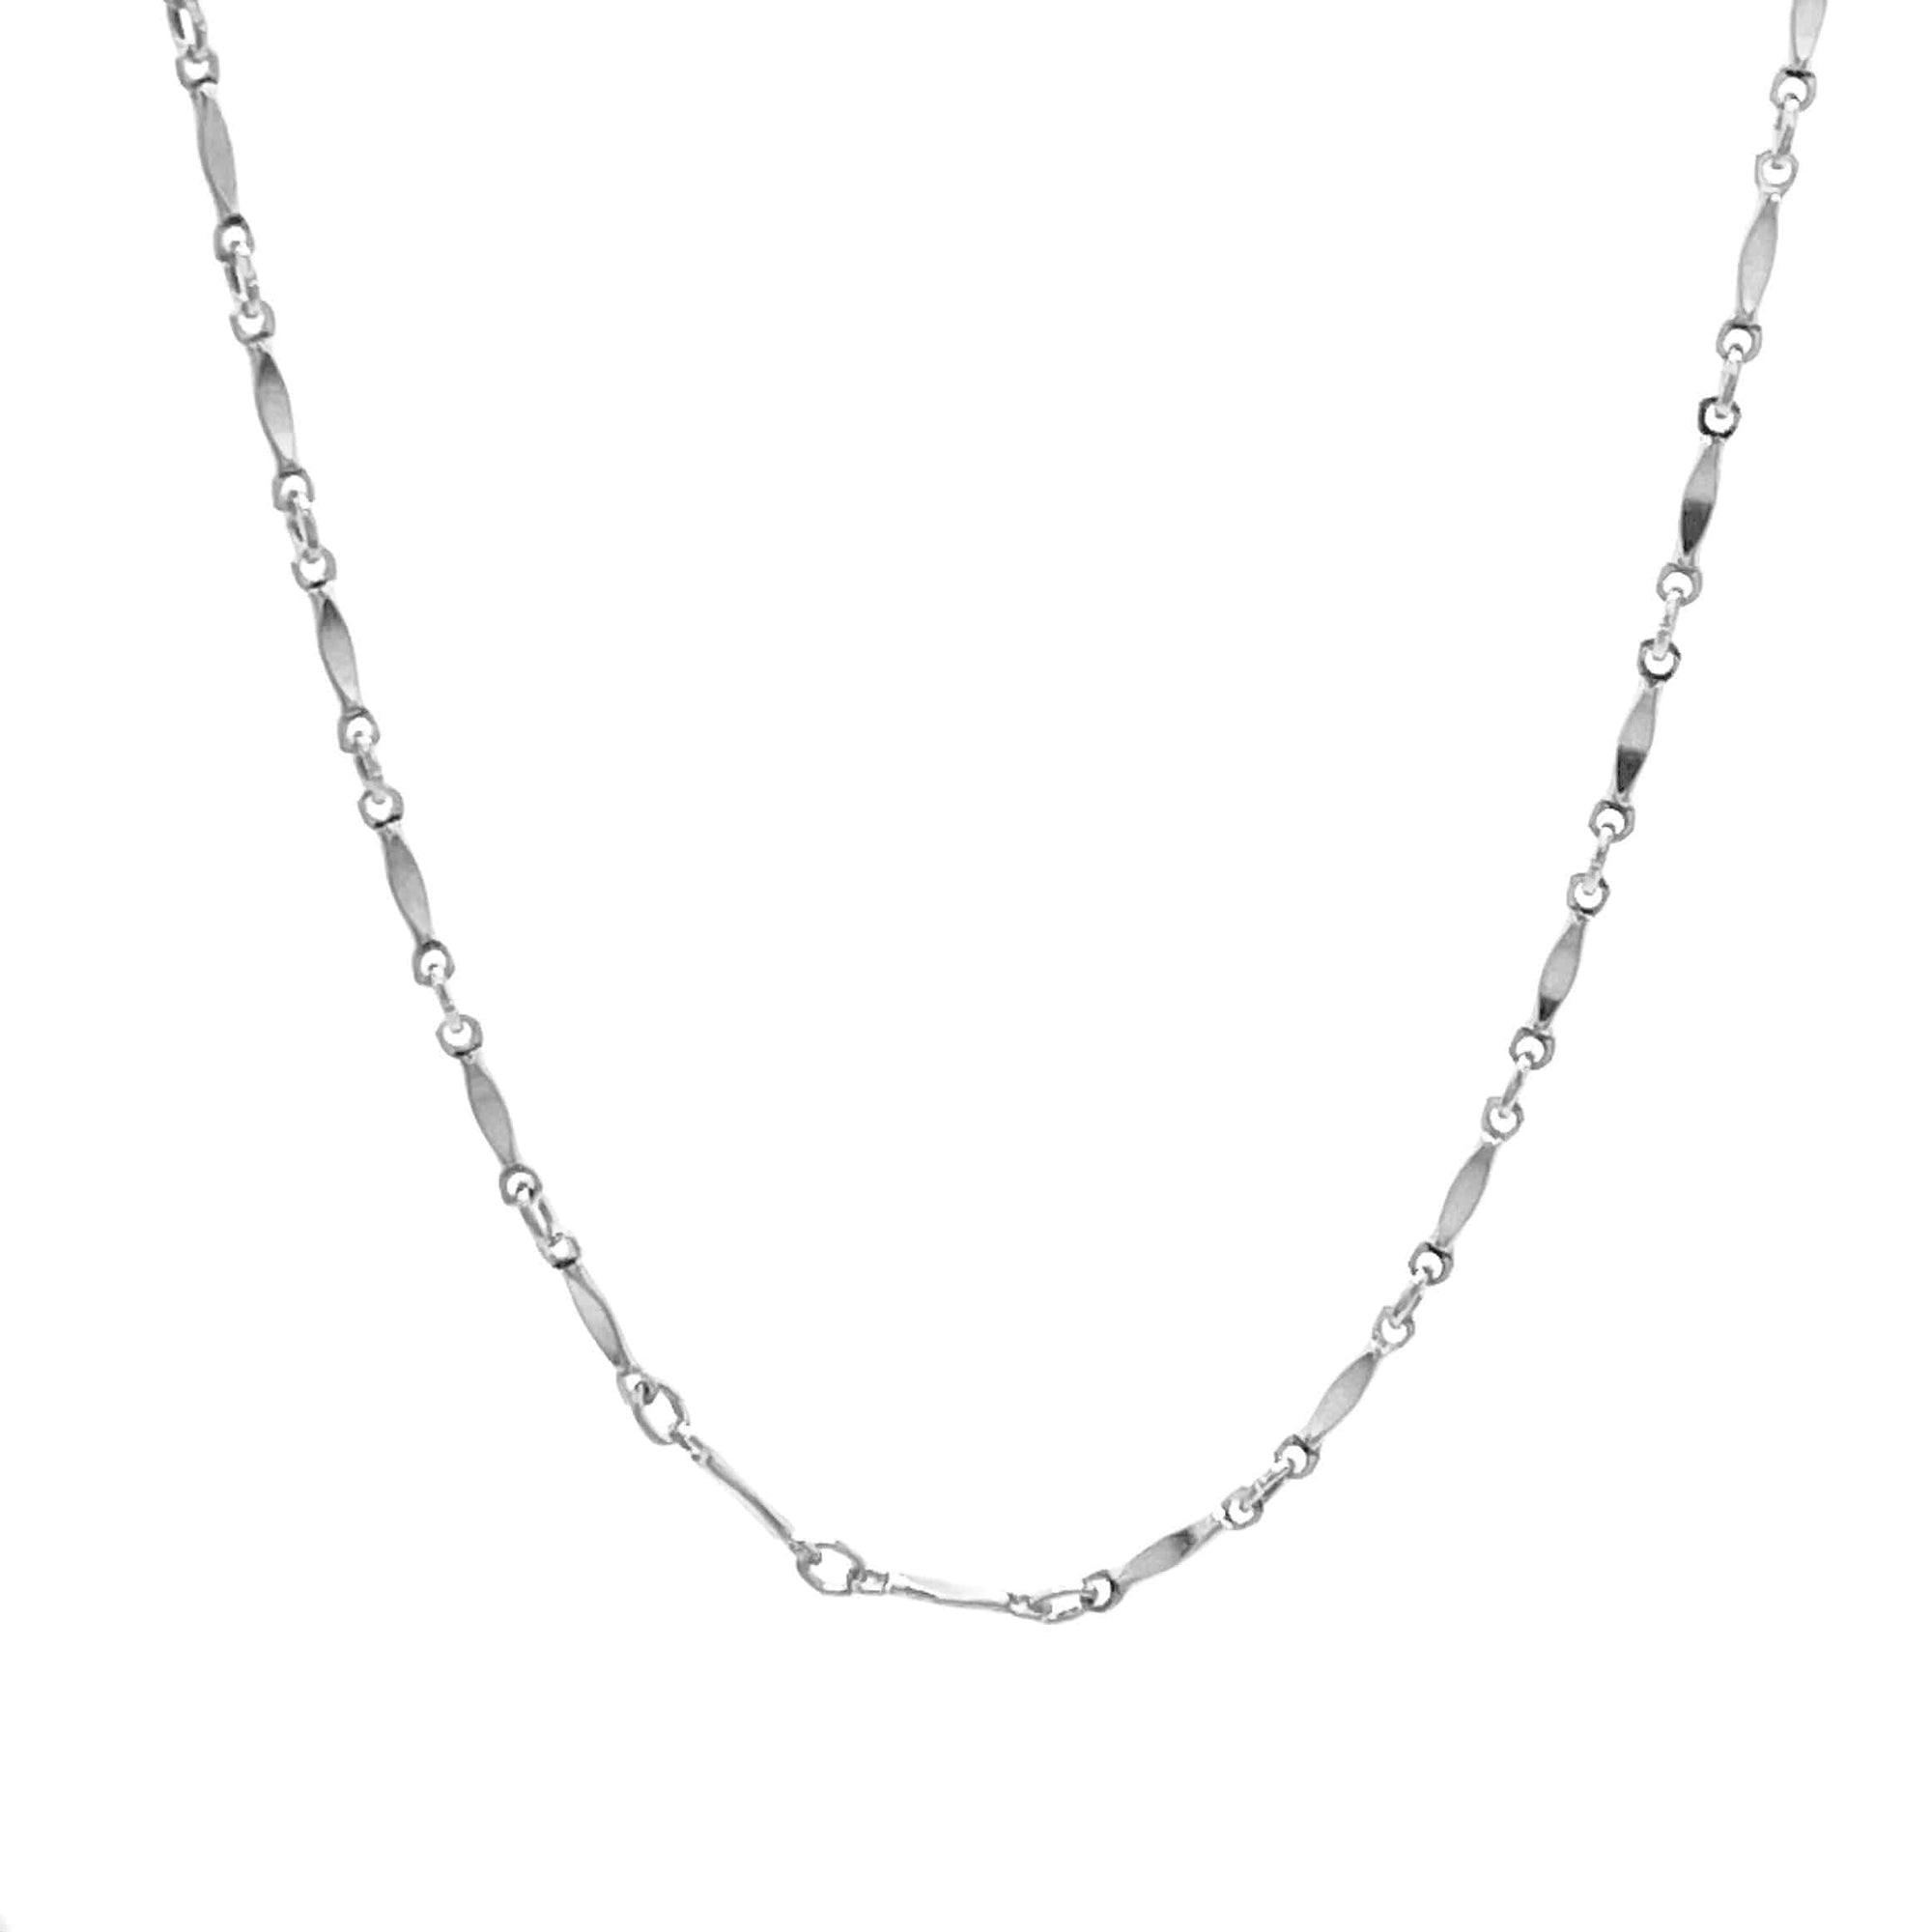 Dainty Bar Chain Layering Necklace w/ 2" Built-In Extender - Silver - The Preppy Bunny